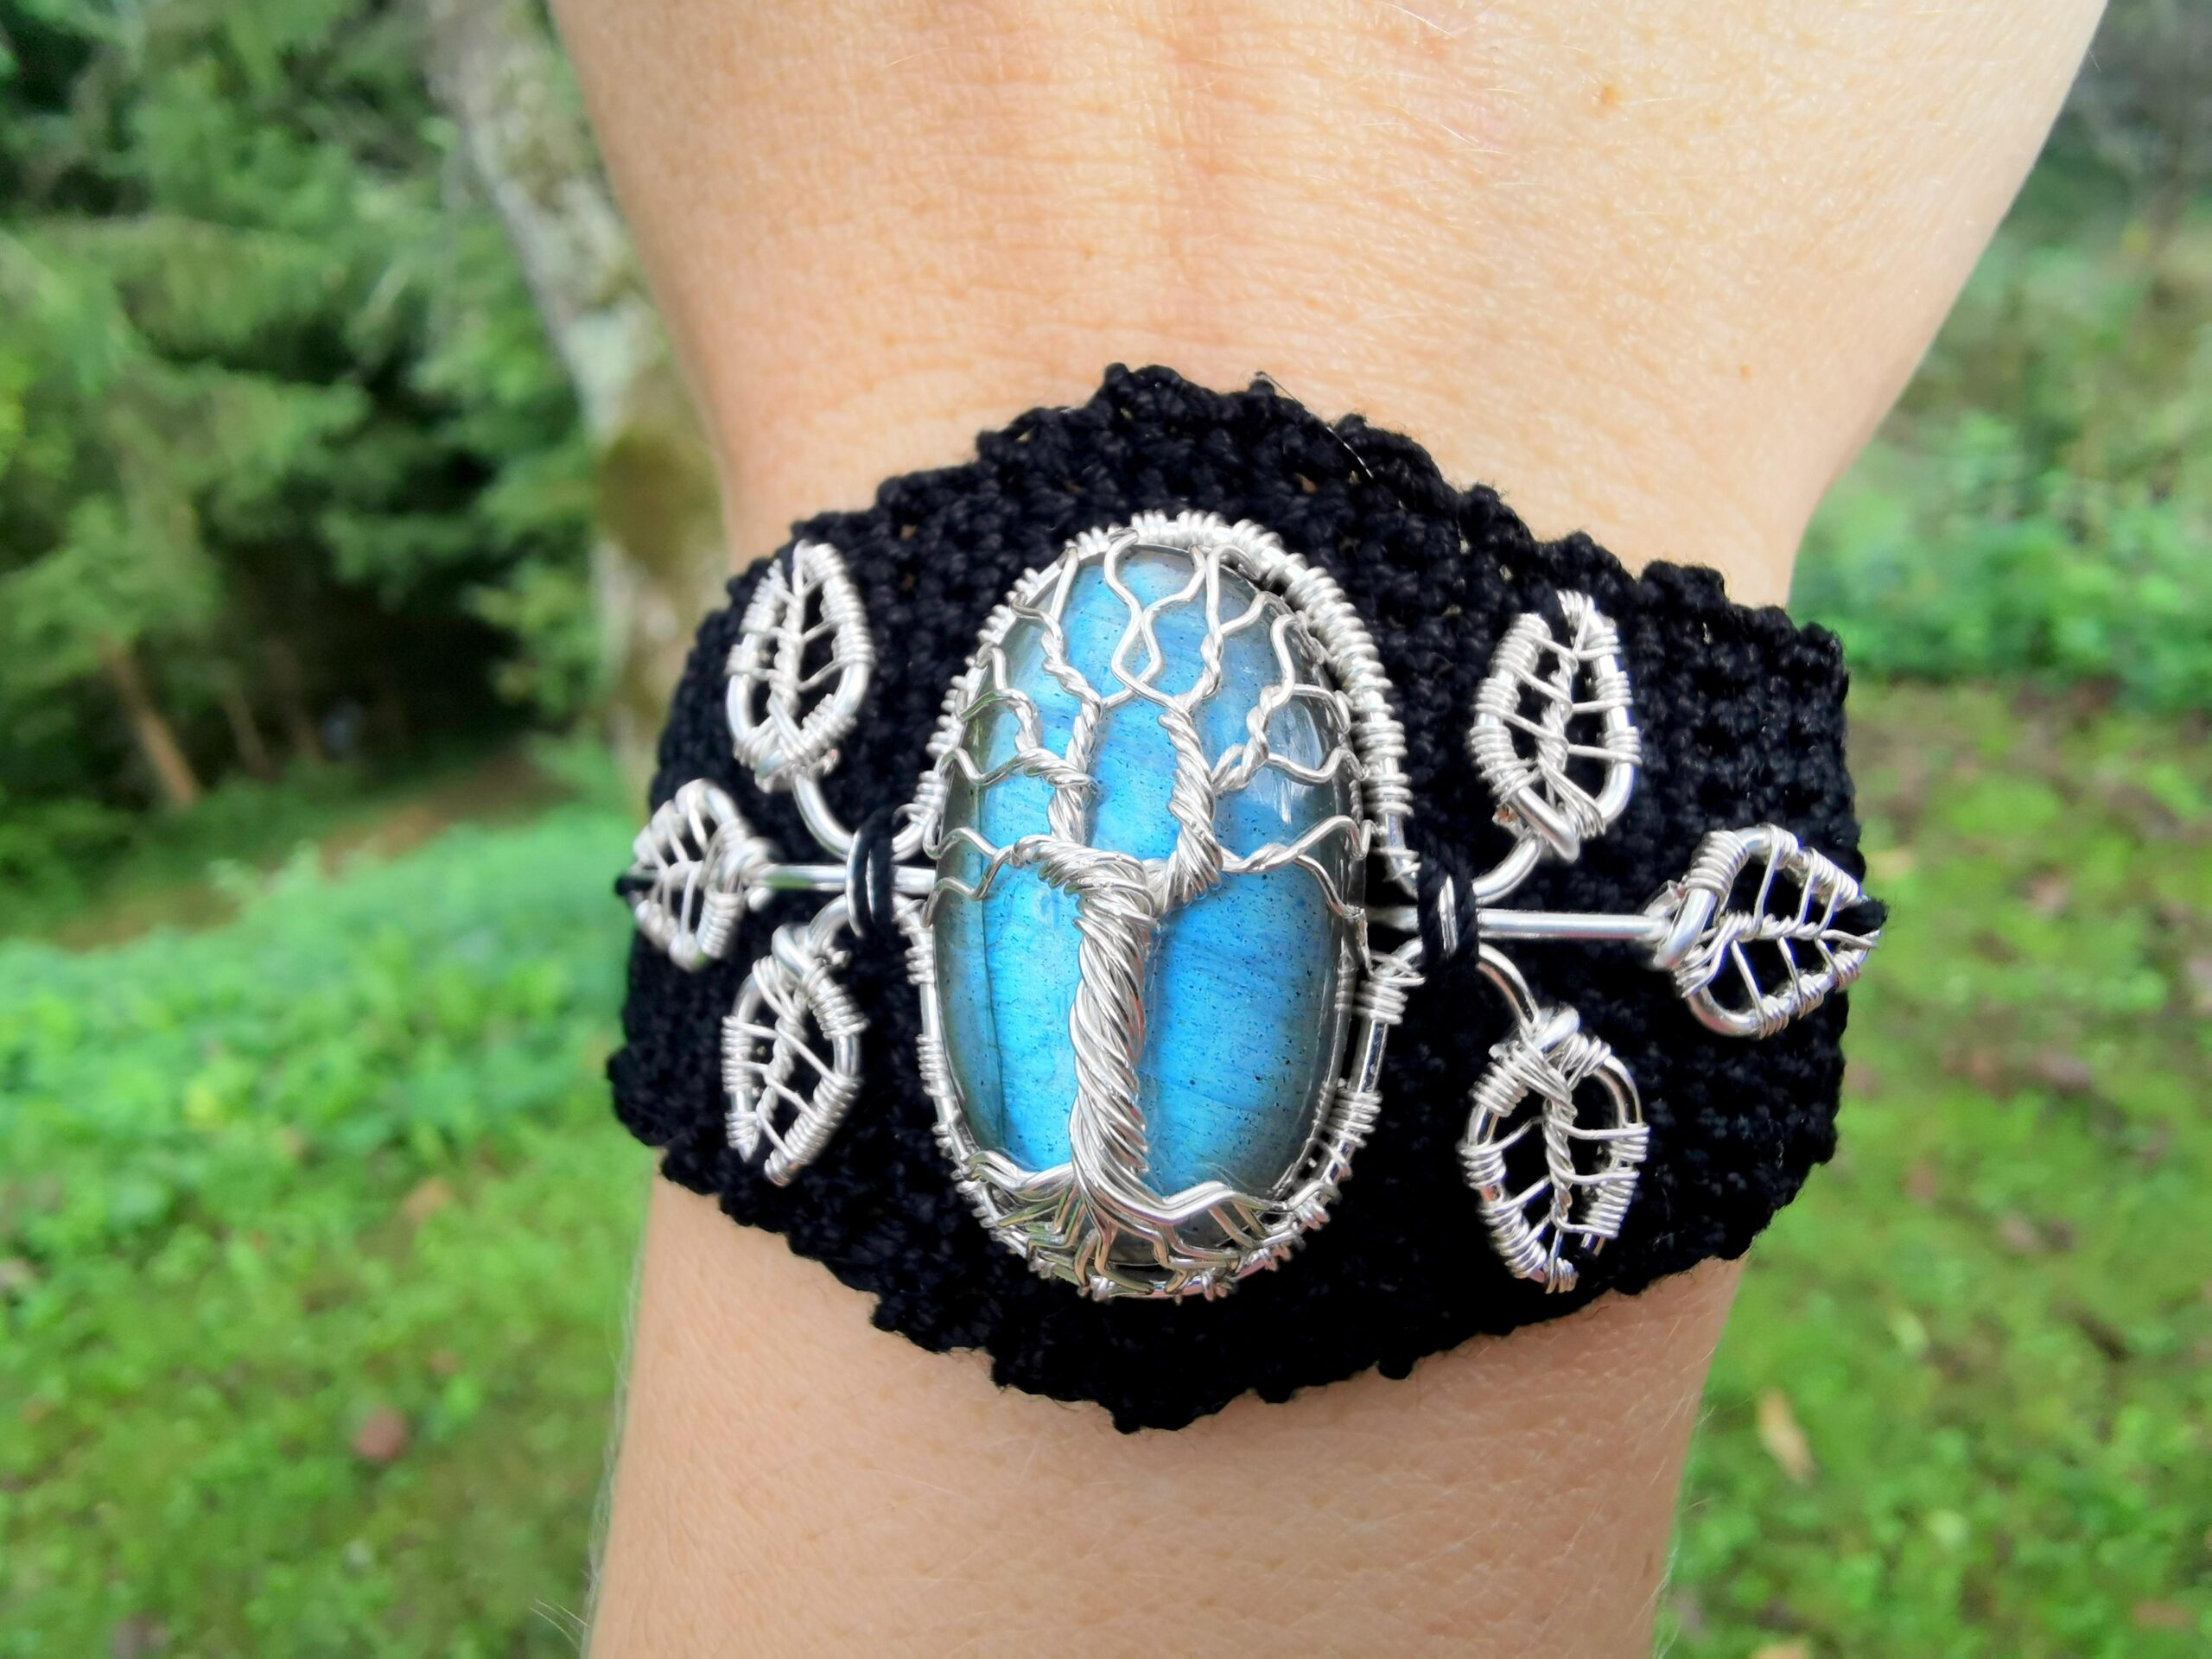 I made a bracelet by combining my two passions, crocheting and wire wrapping.